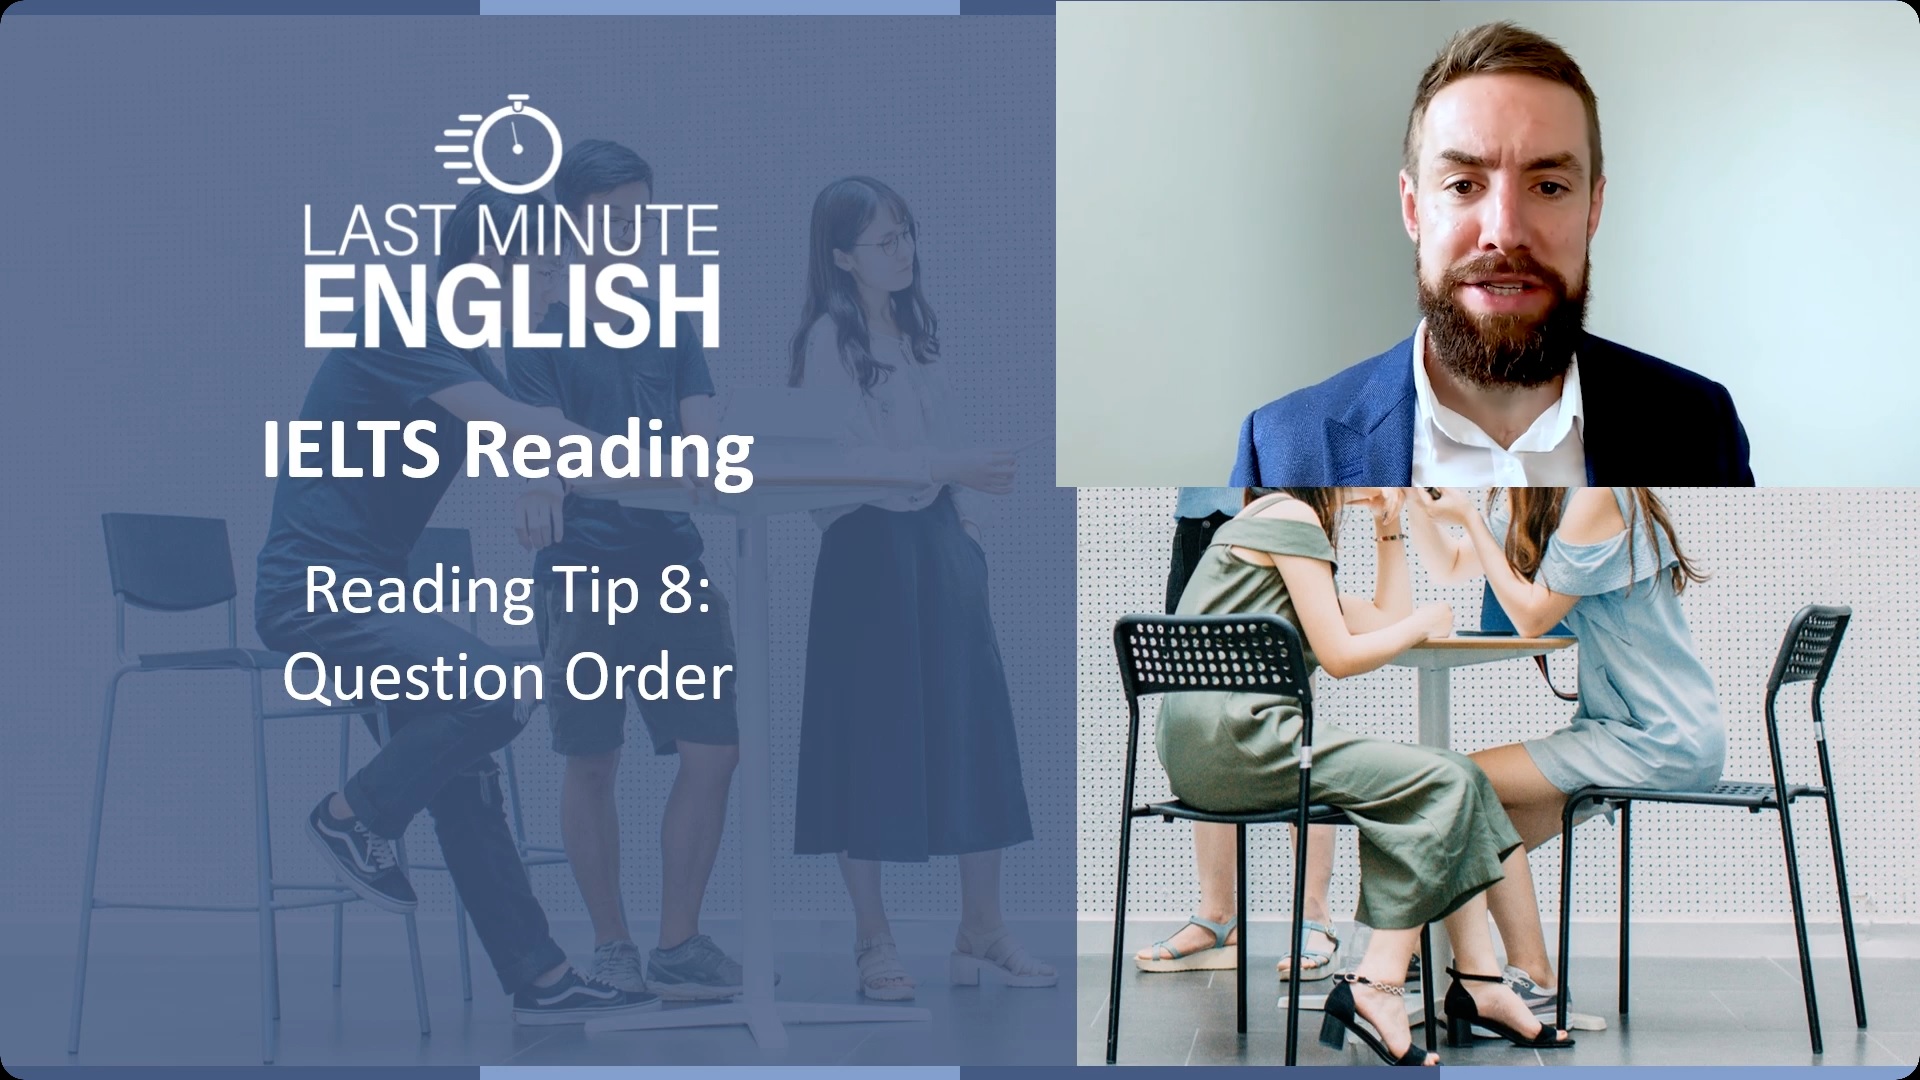 IELTS Reading - Tip 8A - Question Order